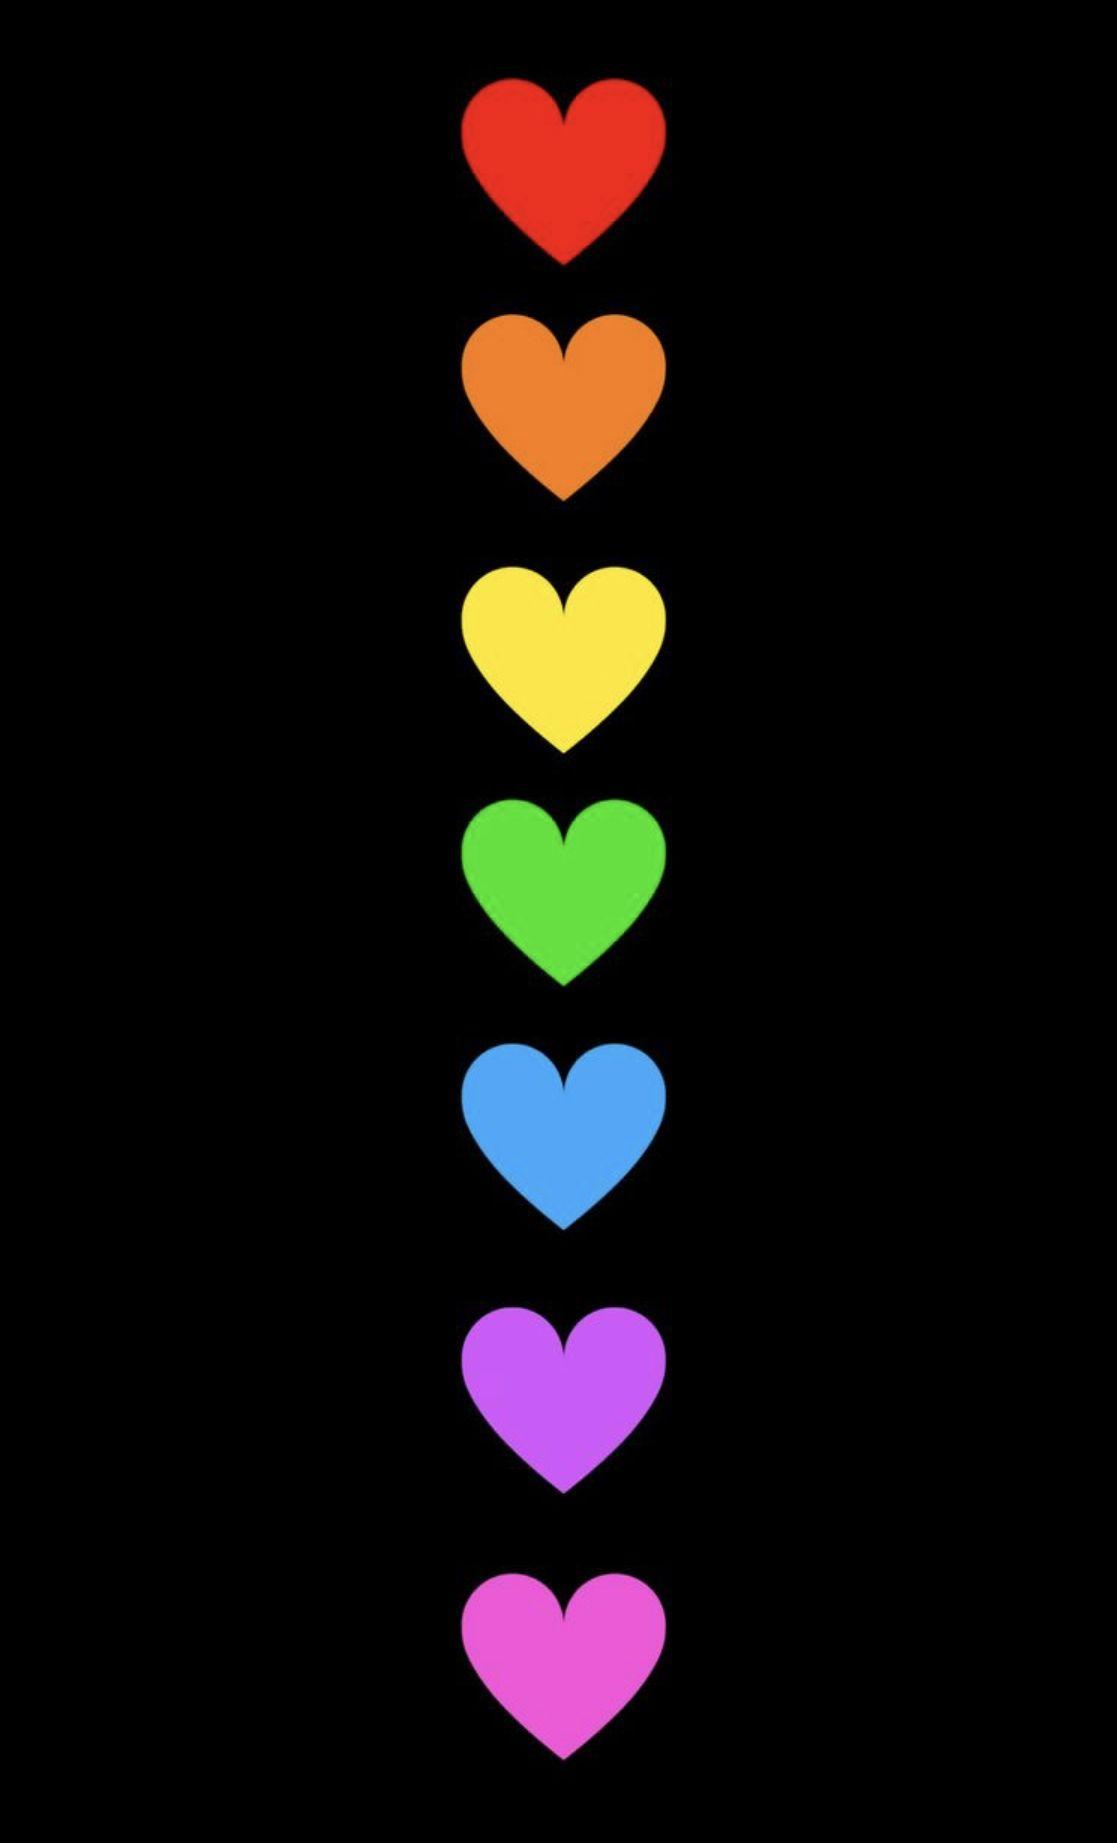 Download Spread Some Love With A Beautiful Rainbow Heart Wallpaper   Wallpaperscom